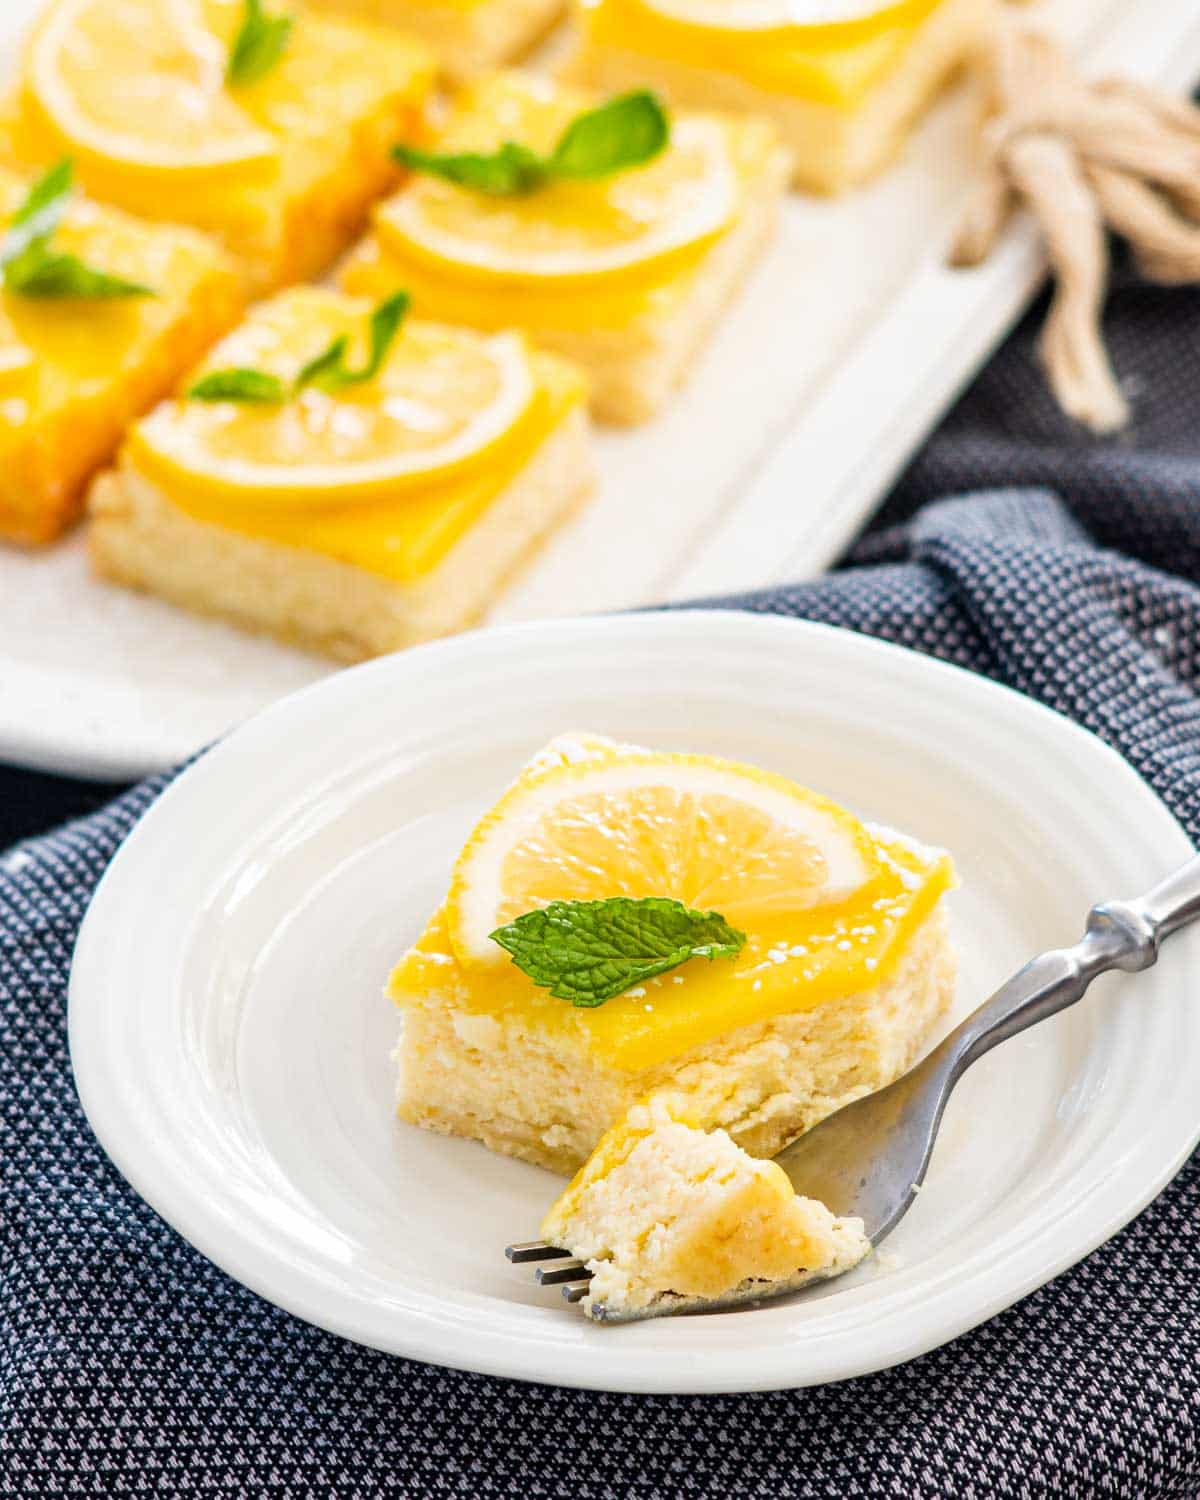 a lemon cheesecake bar garnished with lemon slice and mint leaf on a white plate with a fork taking out a piece.